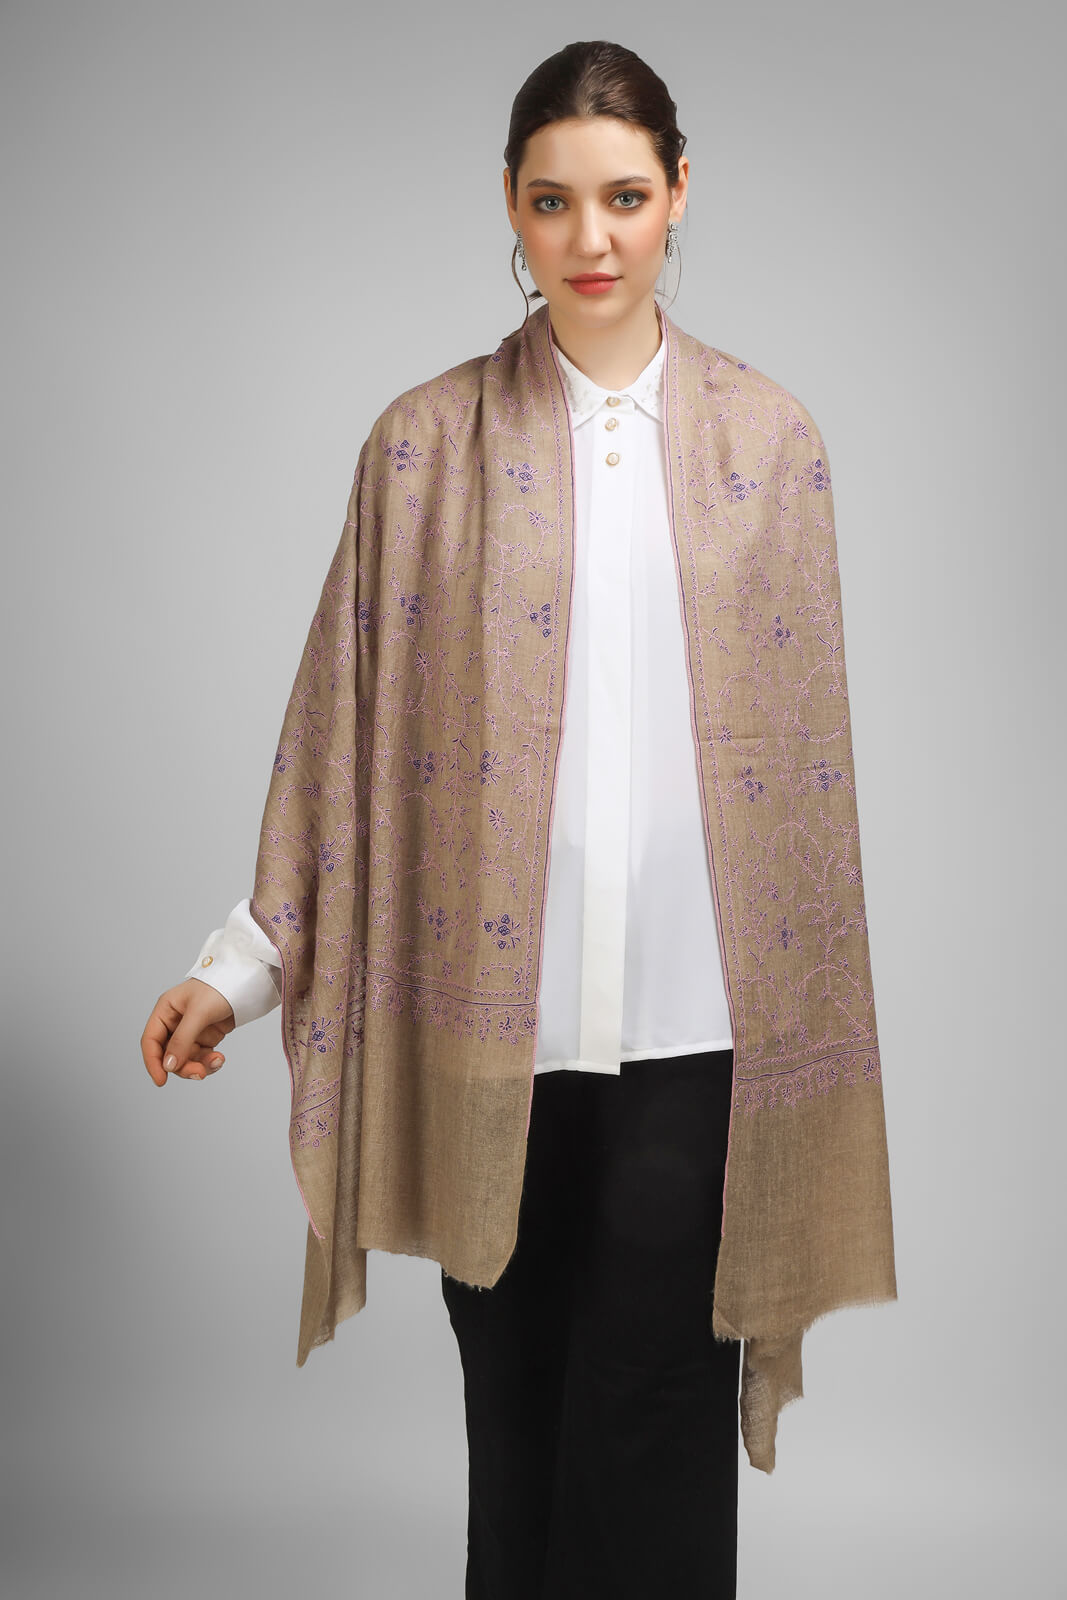 PASHMINA EMBROIDERY STOLE -  Natural Pashmina Jaldaar with a Purple embroidery stole,- We deliver to United States, China, Japan, Germany, United Kingdom, France, Canada, South Korea, Australia, and Switzerland.